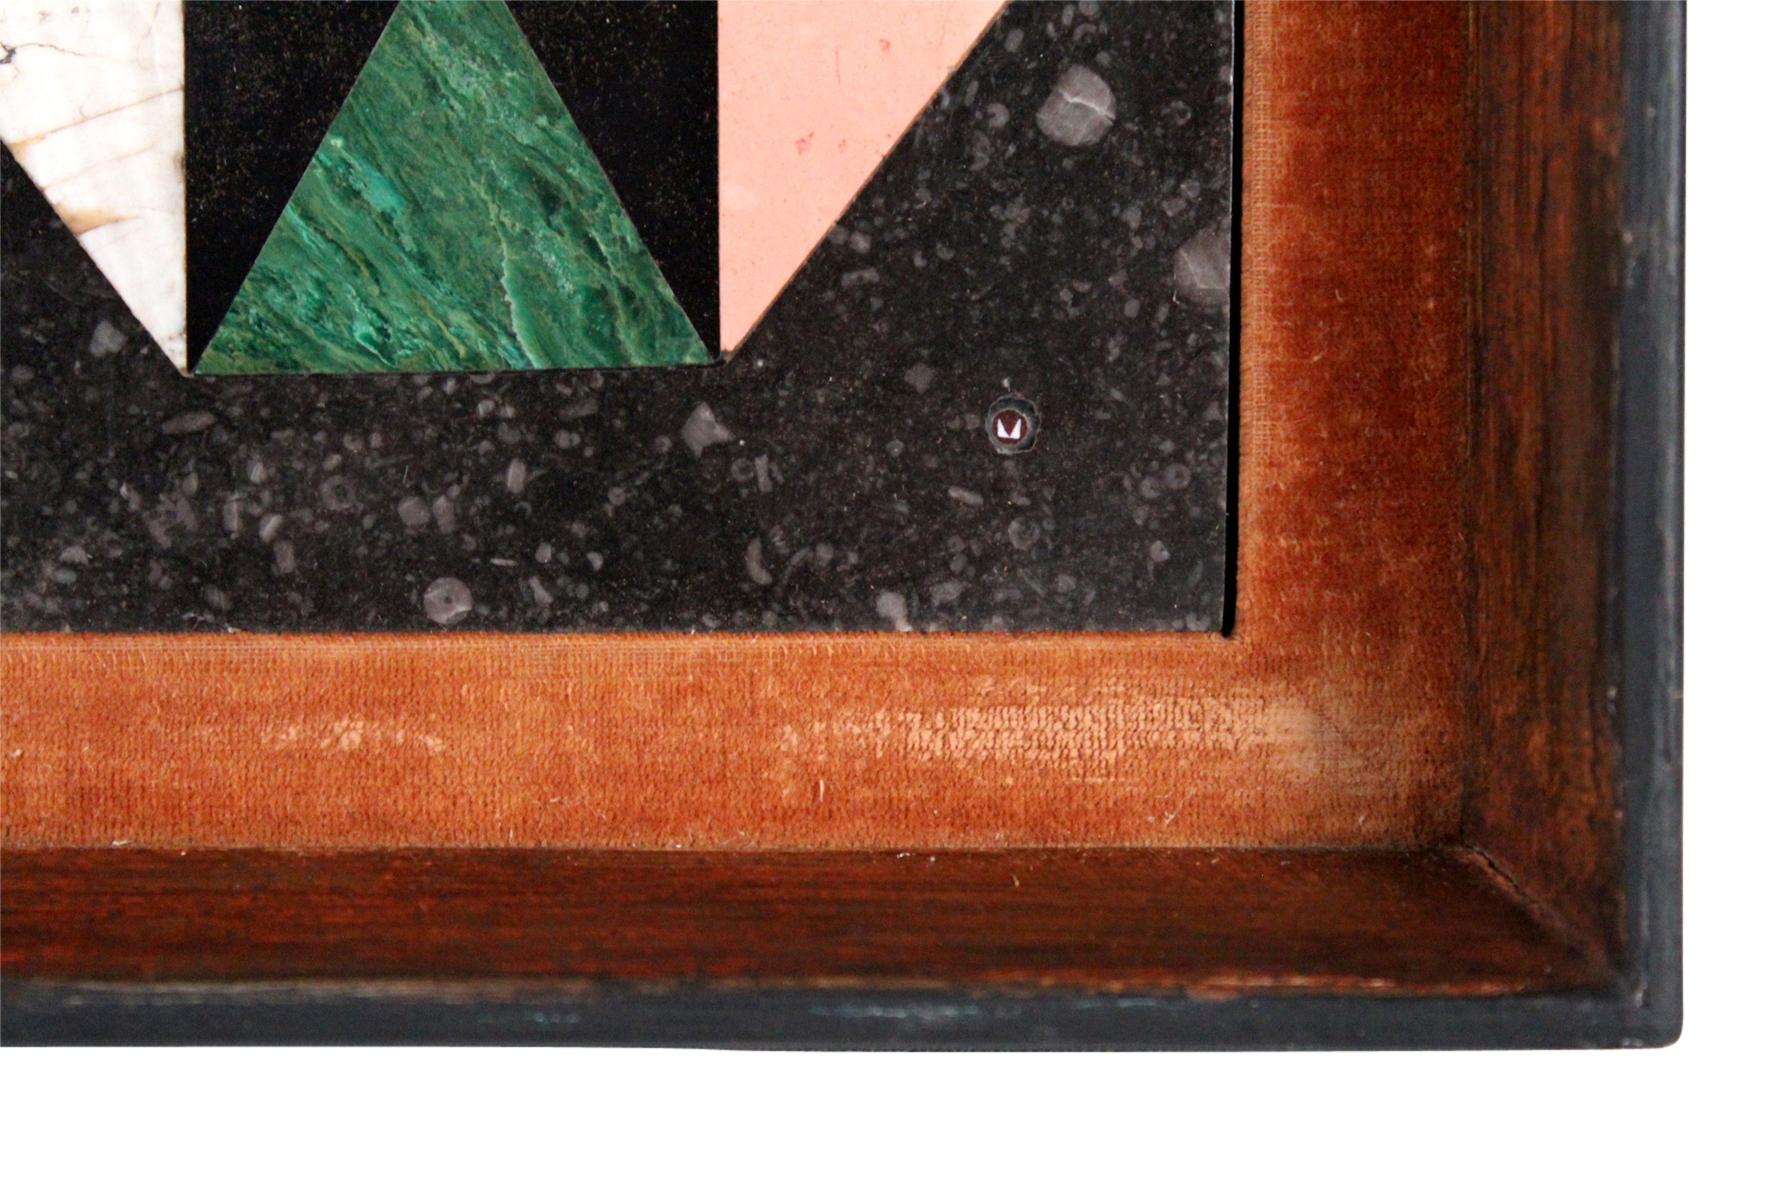 Rare geometric pietra dure designed by Richard Blow executed in exotic hard stones and marbles for his studio in Montici, Italy. Signed with makers cipher, circa 1950s


During the 1950s, American painter Richard Blow brought a unique perspective